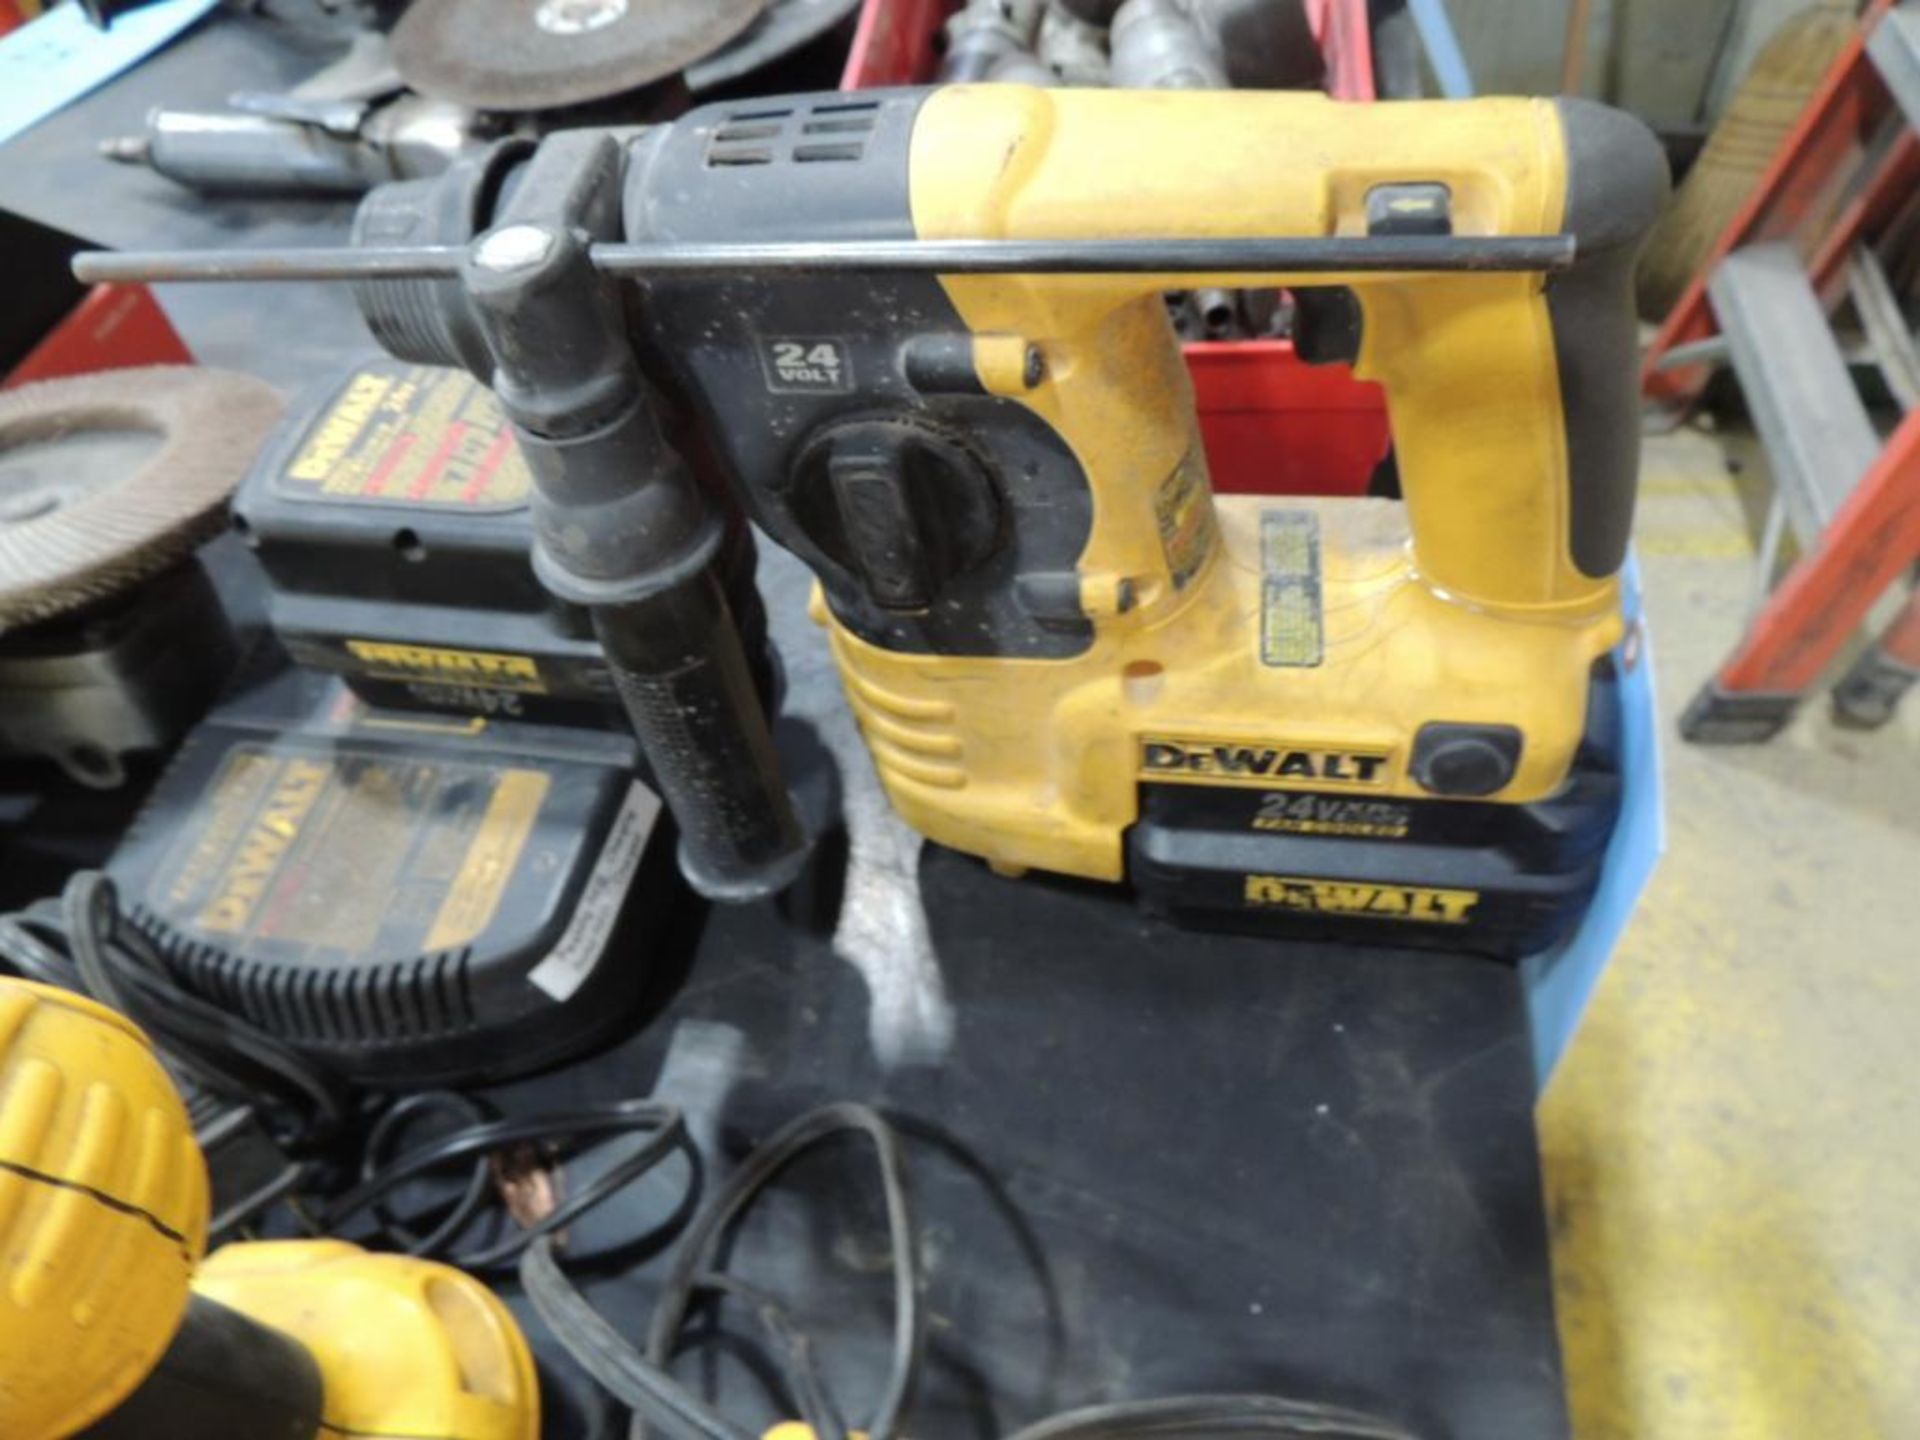 DEWALT DC223 HAMMER DRILL, 24 VOLT, 1 BATTERY AND CHARGER (Building T3)